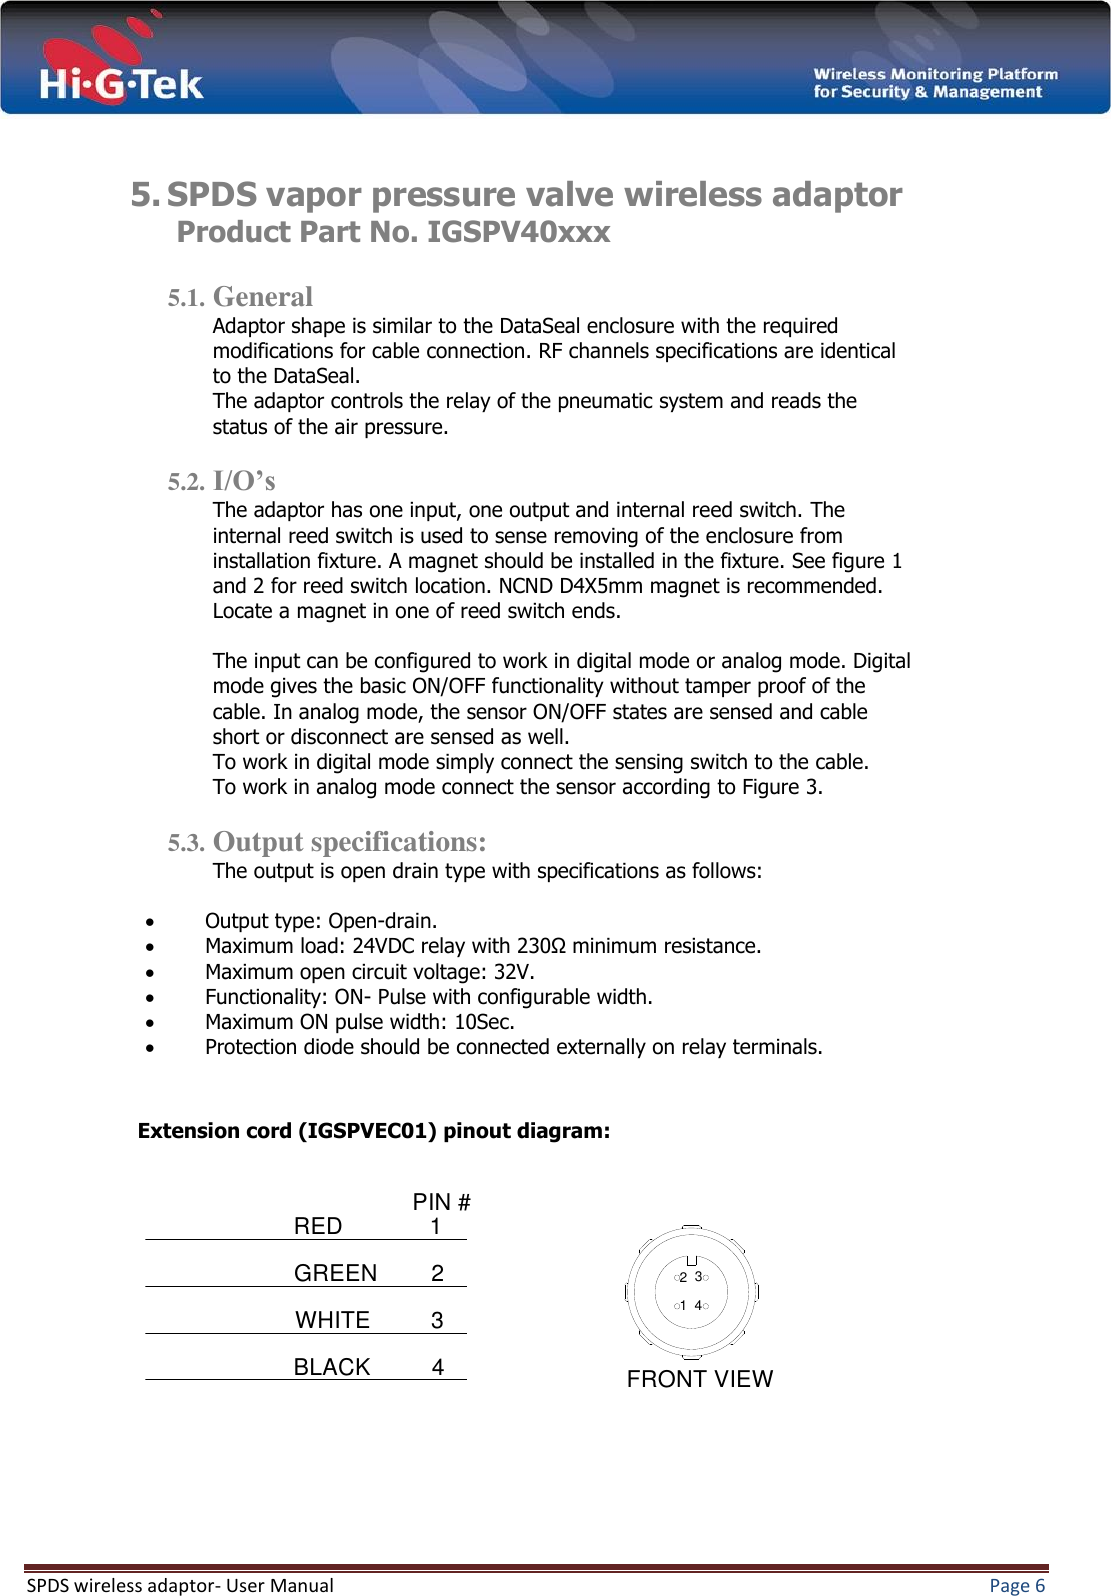  SPDS wireless adaptor- User Manual  Page 6    5. SPDS vapor pressure valve wireless adaptor   Product Part No. IGSPV40xxx  5.1. General Adaptor shape is similar to the DataSeal enclosure with the required modifications for cable connection. RF channels specifications are identical to the DataSeal. The adaptor controls the relay of the pneumatic system and reads the status of the air pressure.  5.2. I/O’s The adaptor has one input, one output and internal reed switch. The internal reed switch is used to sense removing of the enclosure from installation fixture. A magnet should be installed in the fixture. See figure 1 and 2 for reed switch location. NCND D4X5mm magnet is recommended. Locate a magnet in one of reed switch ends.  The input can be configured to work in digital mode or analog mode. Digital mode gives the basic ON/OFF functionality without tamper proof of the cable. In analog mode, the sensor ON/OFF states are sensed and cable short or disconnect are sensed as well. To work in digital mode simply connect the sensing switch to the cable.  To work in analog mode connect the sensor according to Figure 3.  5.3. Output specifications: The output is open drain type with specifications as follows:   Output type: Open-drain.  Maximum load: 24VDC relay with 230Ω minimum resistance.  Maximum open circuit voltage: 32V.  Functionality: ON- Pulse with configurable width.  Maximum ON pulse width: 10Sec.  Protection diode should be connected externally on relay terminals.    Extension cord (IGSPVEC01) pinout diagram:              PIN #4321REDGREENWHITEBLACK FRONT VIEW1234